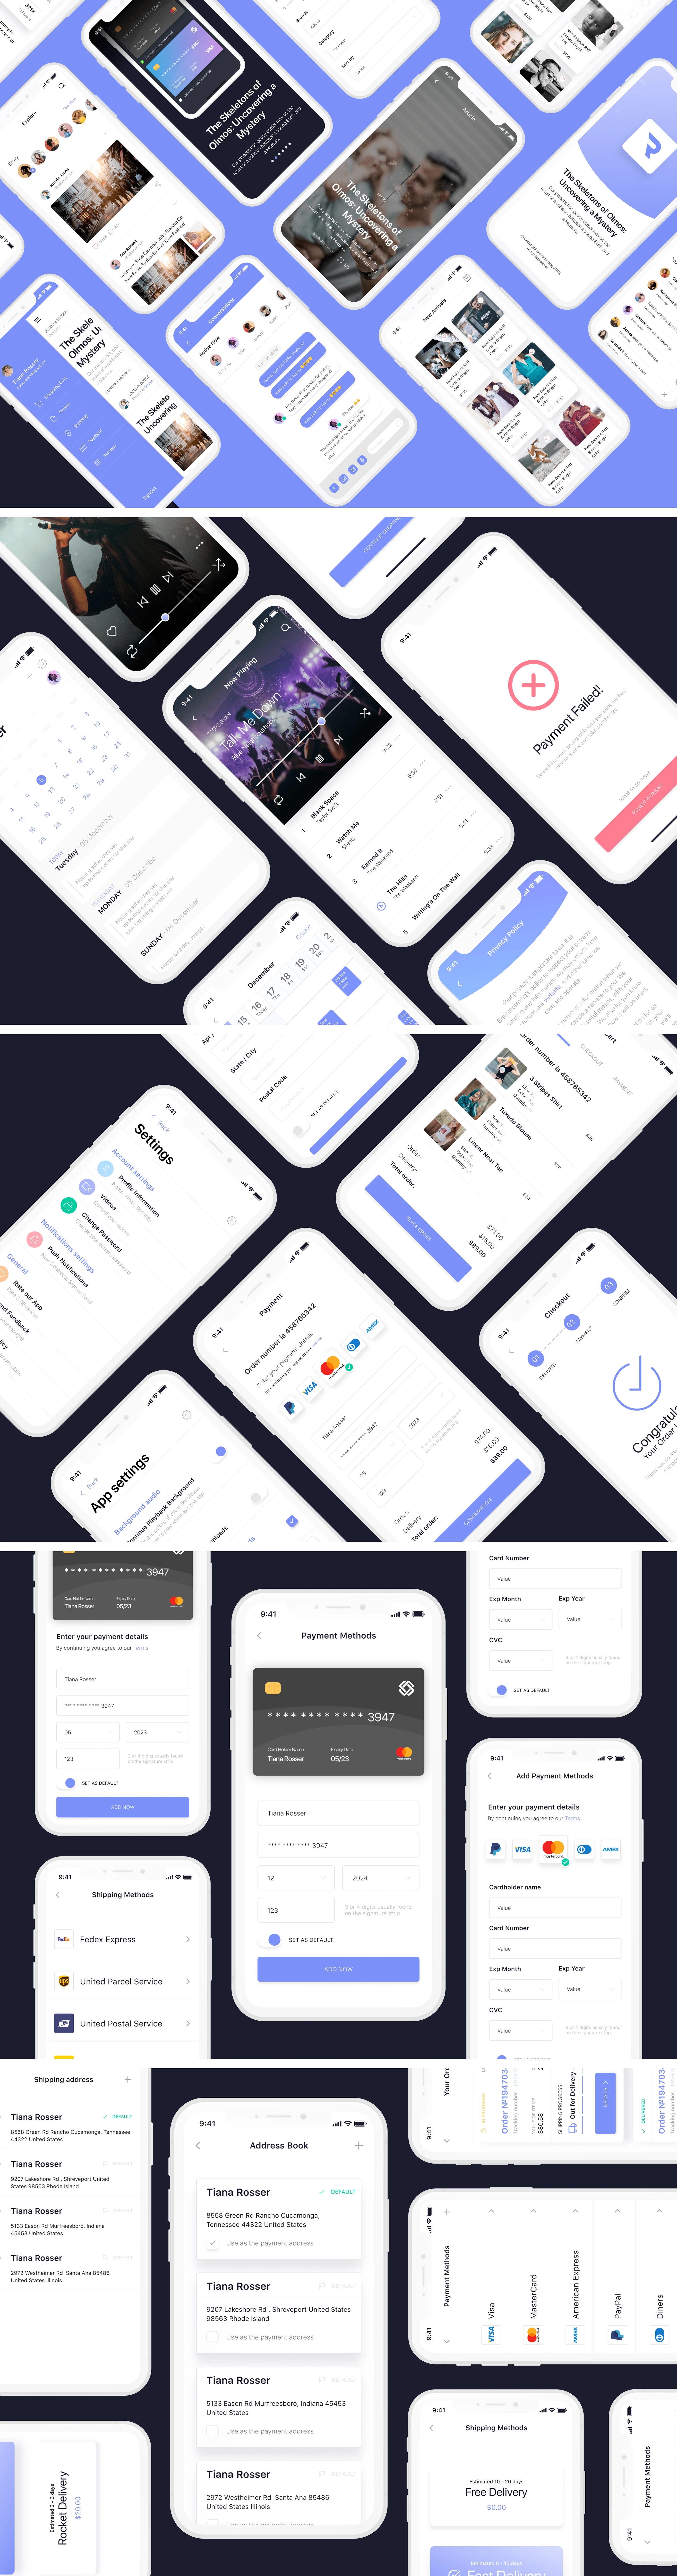 Brainstorming Design System for Figma - It helps designers save hundreds of hours of time and build amazing things in Figma. Tons of handcrafted components and screens created to increase your app creating speed, for Figma.